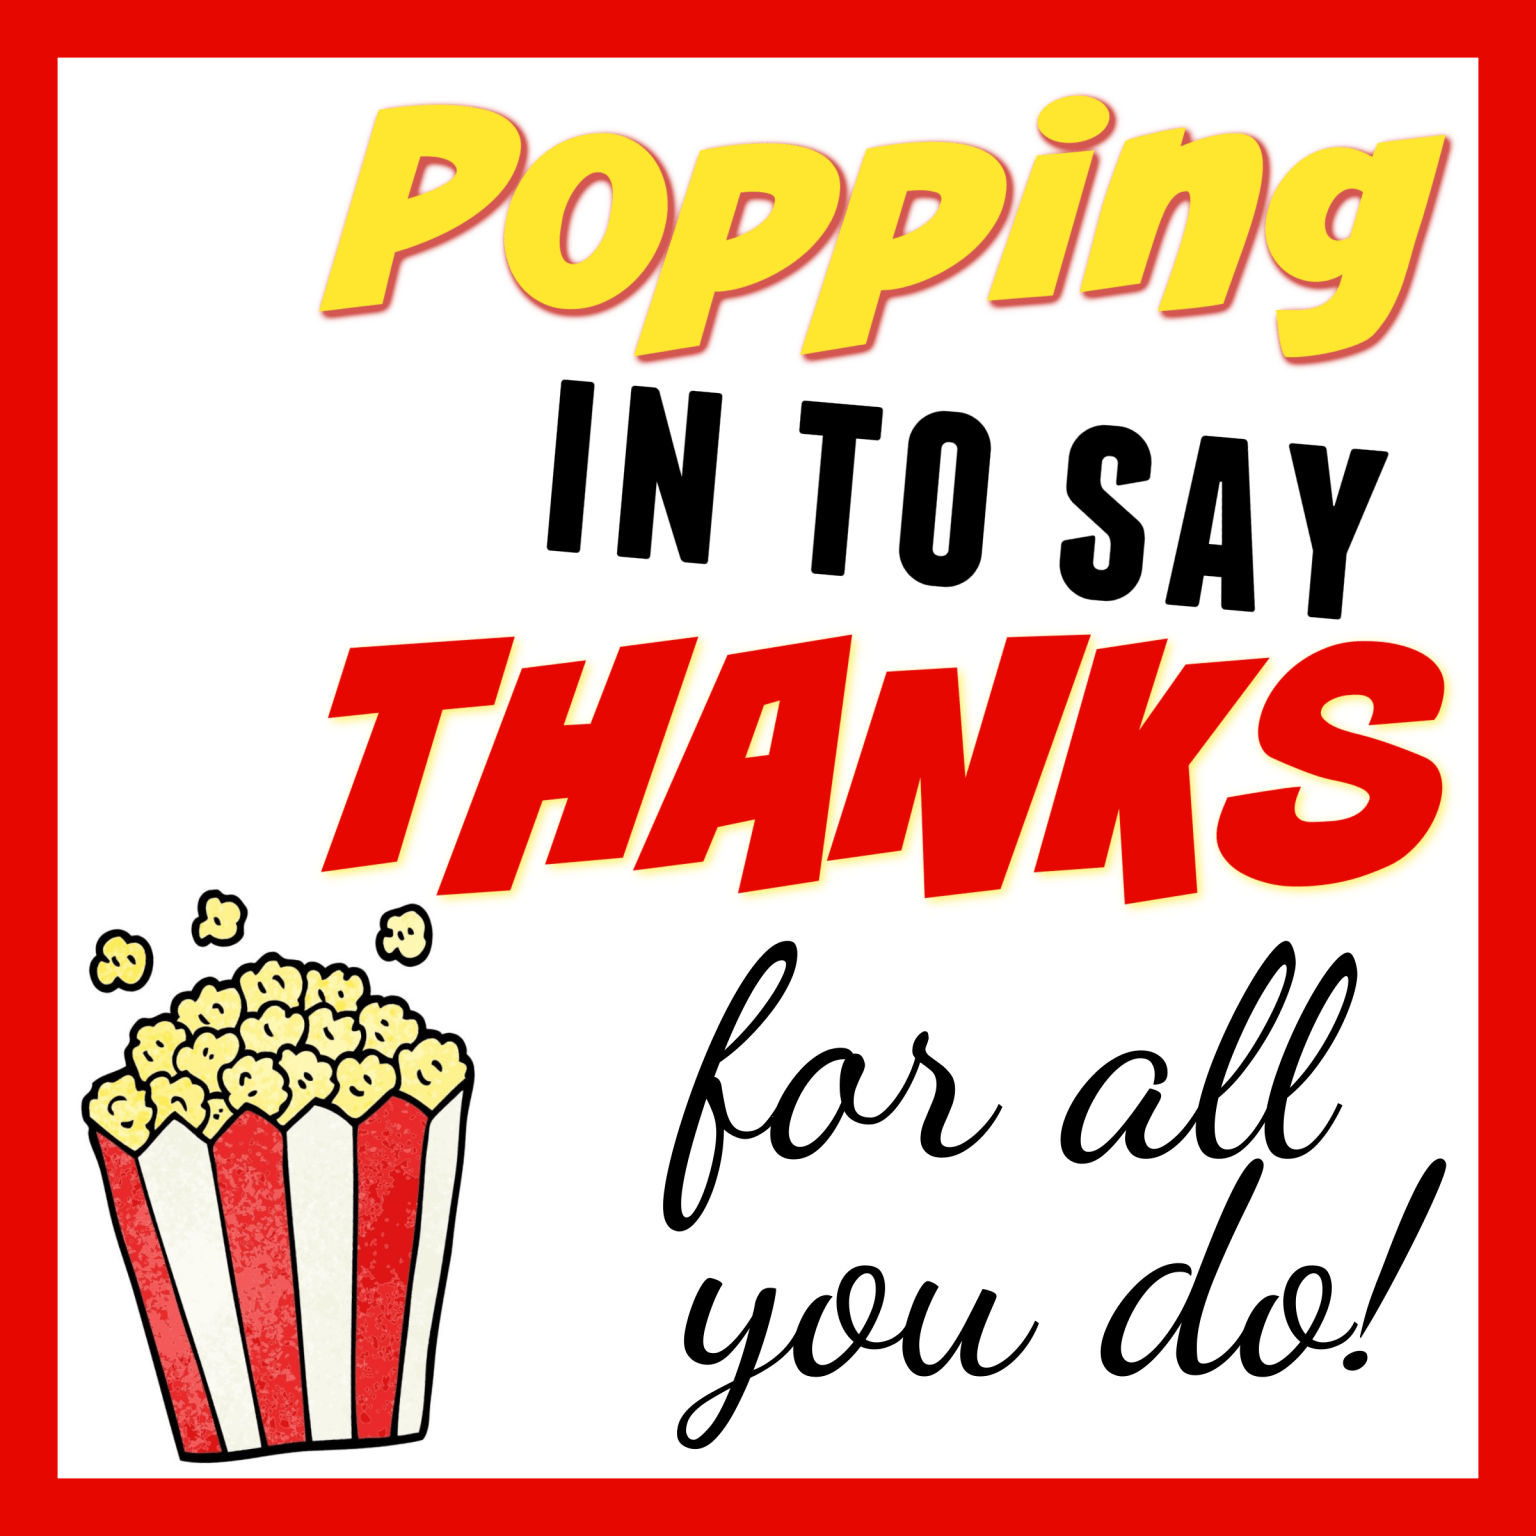 POPPING in to Say THANKS Popcorn Themed Teacher Gift + Free Printable